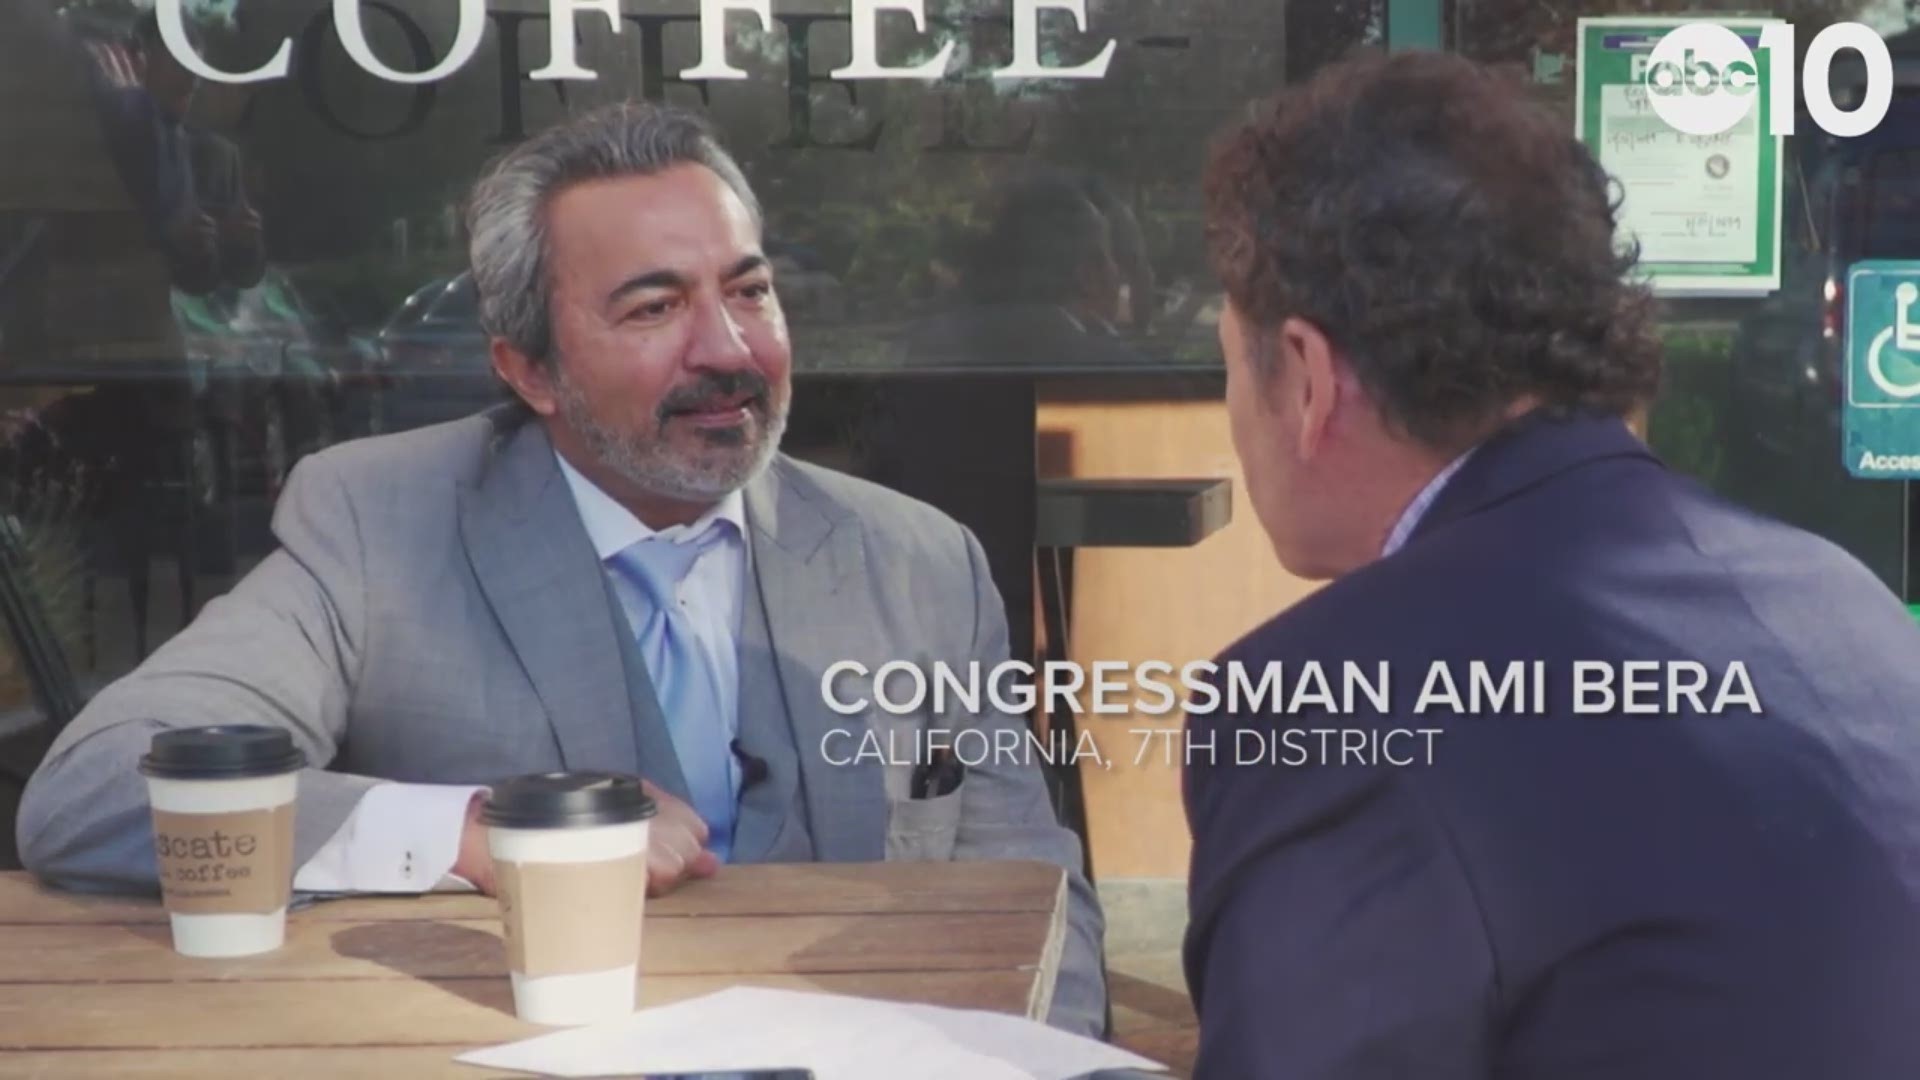 Walt Gray sat down with California Congressman Ami Bera to talks about Medicare For All, the House Impeachment Hearings, his past elections and more.